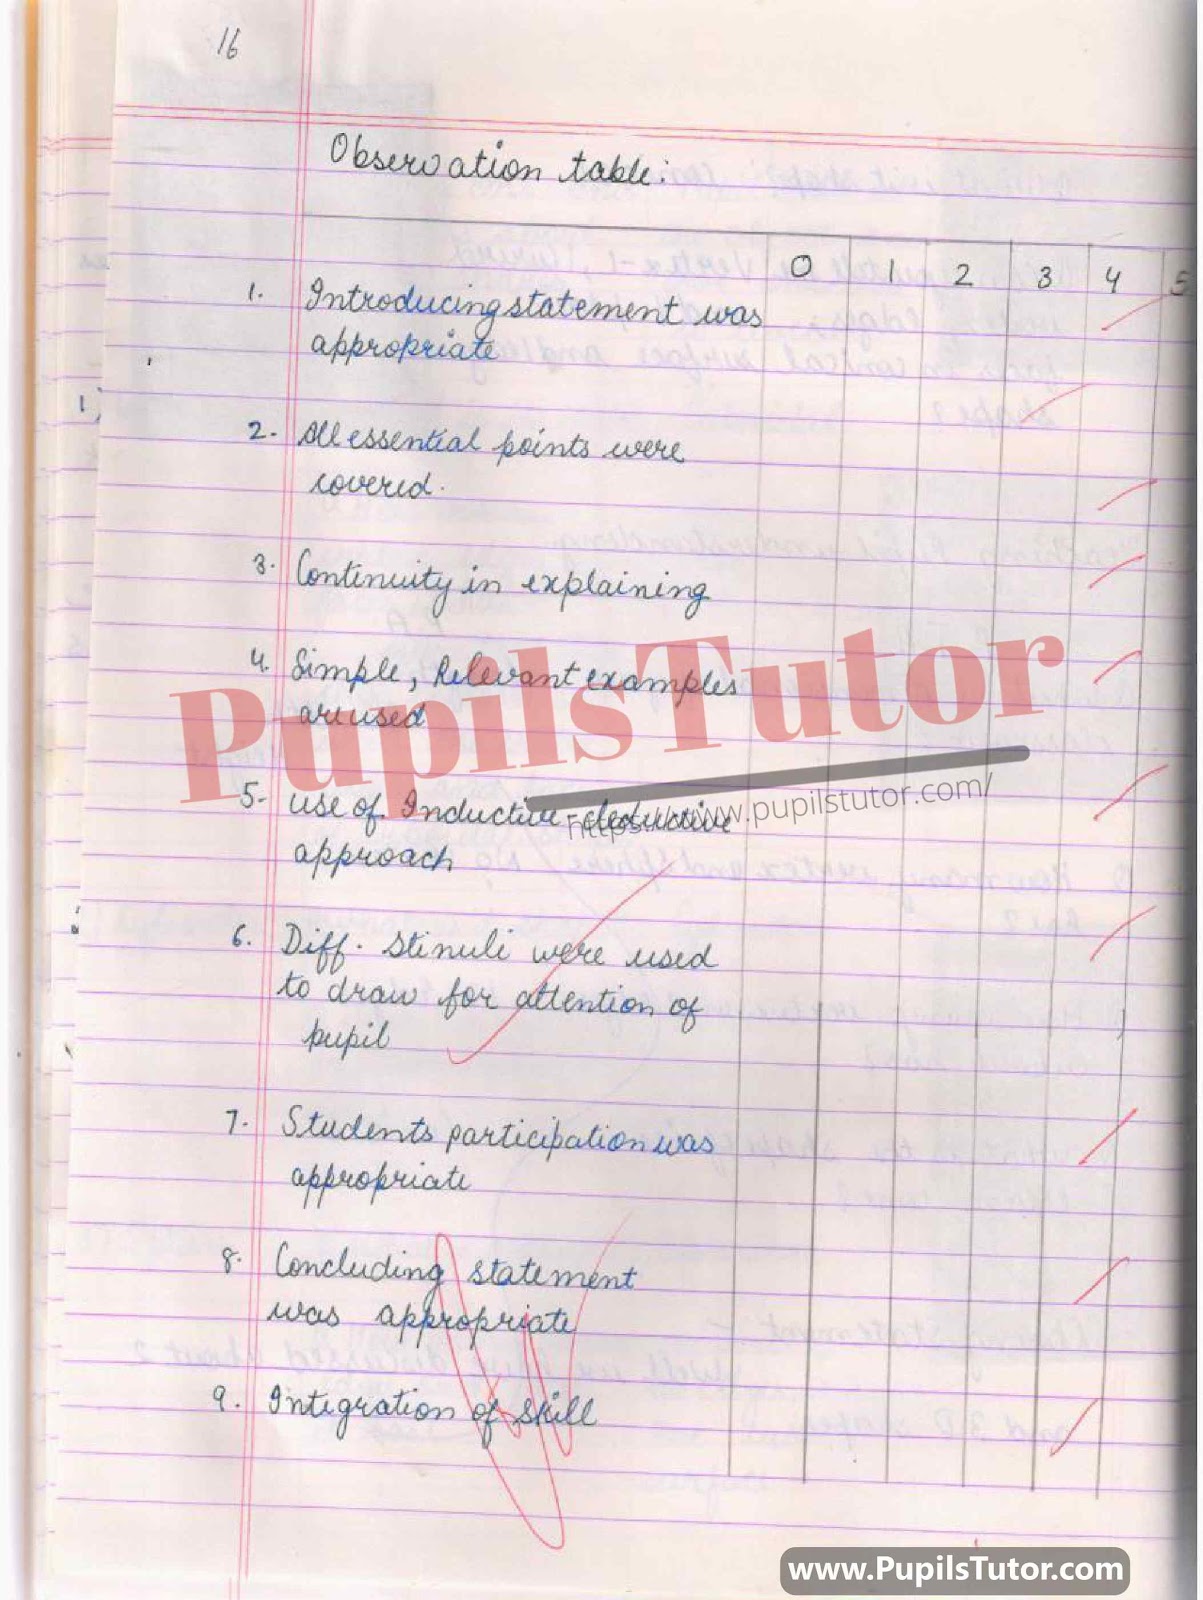 How To Make Maths Lesson Plan For Class 6 On 2D And 3D Shapes In English – [Page And Photo 4] – pupilstutor.com